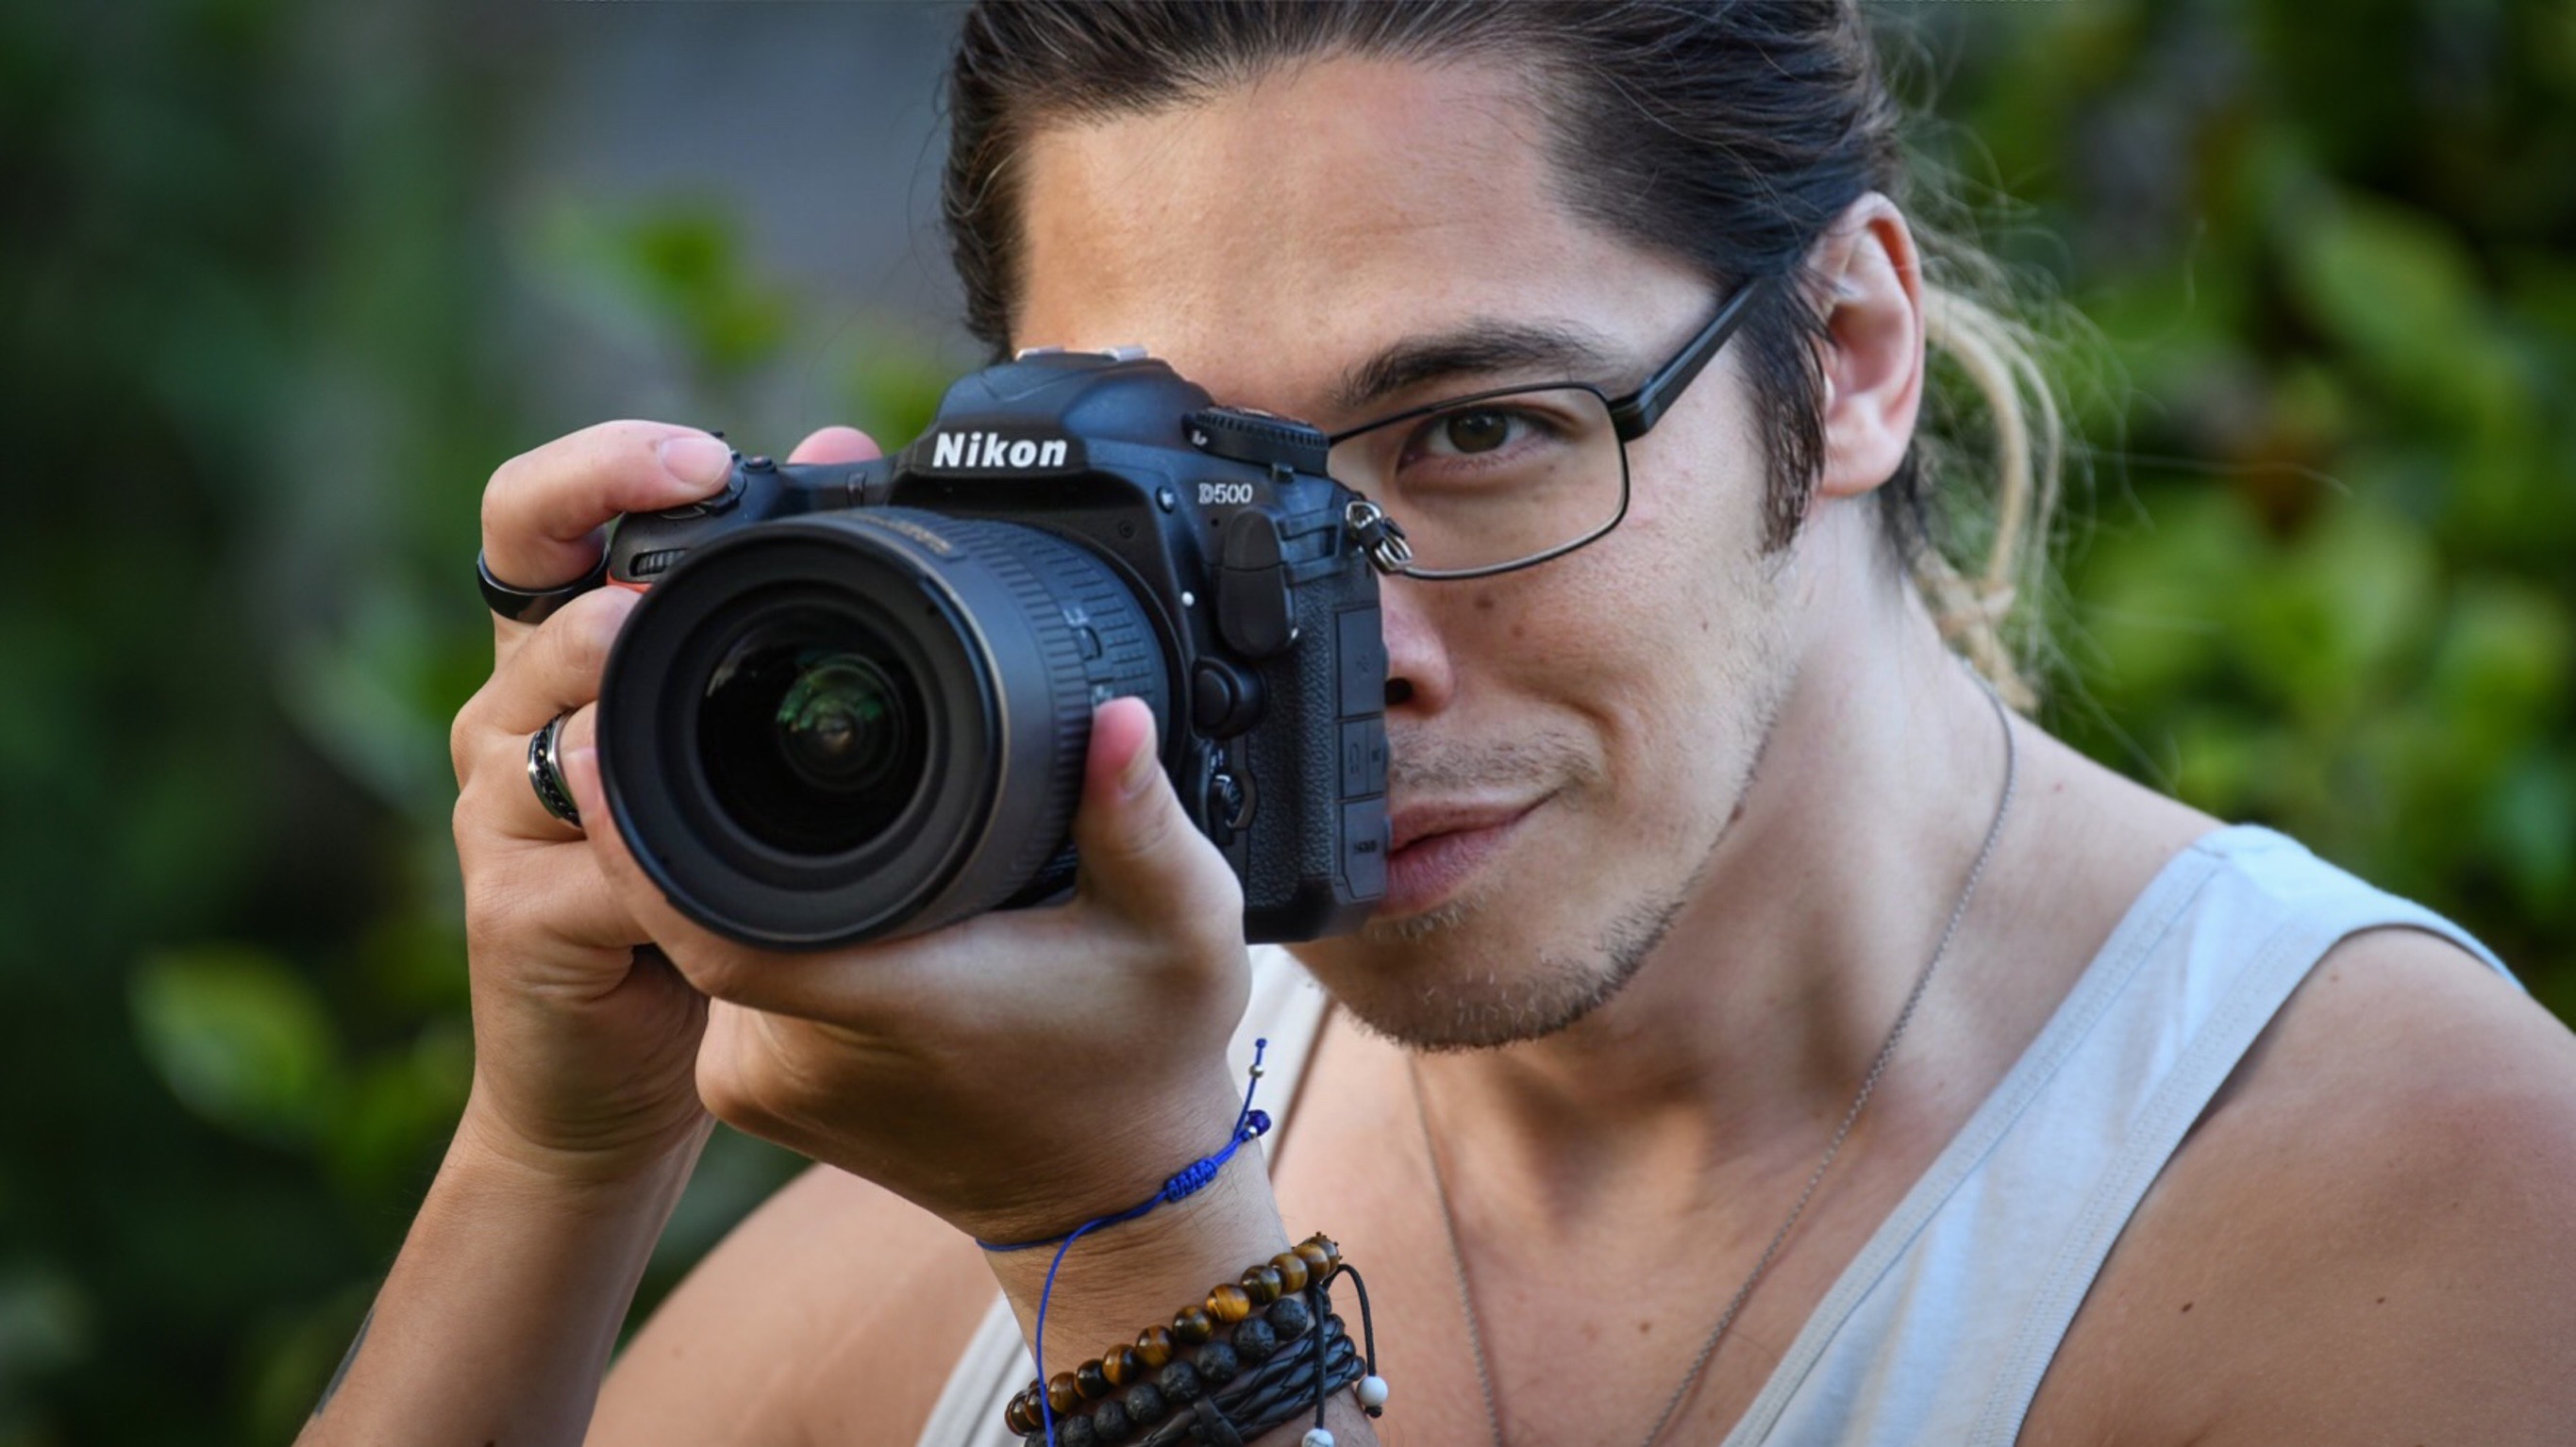 Back to the action: Nikon D500 Review: Digital Photography Review